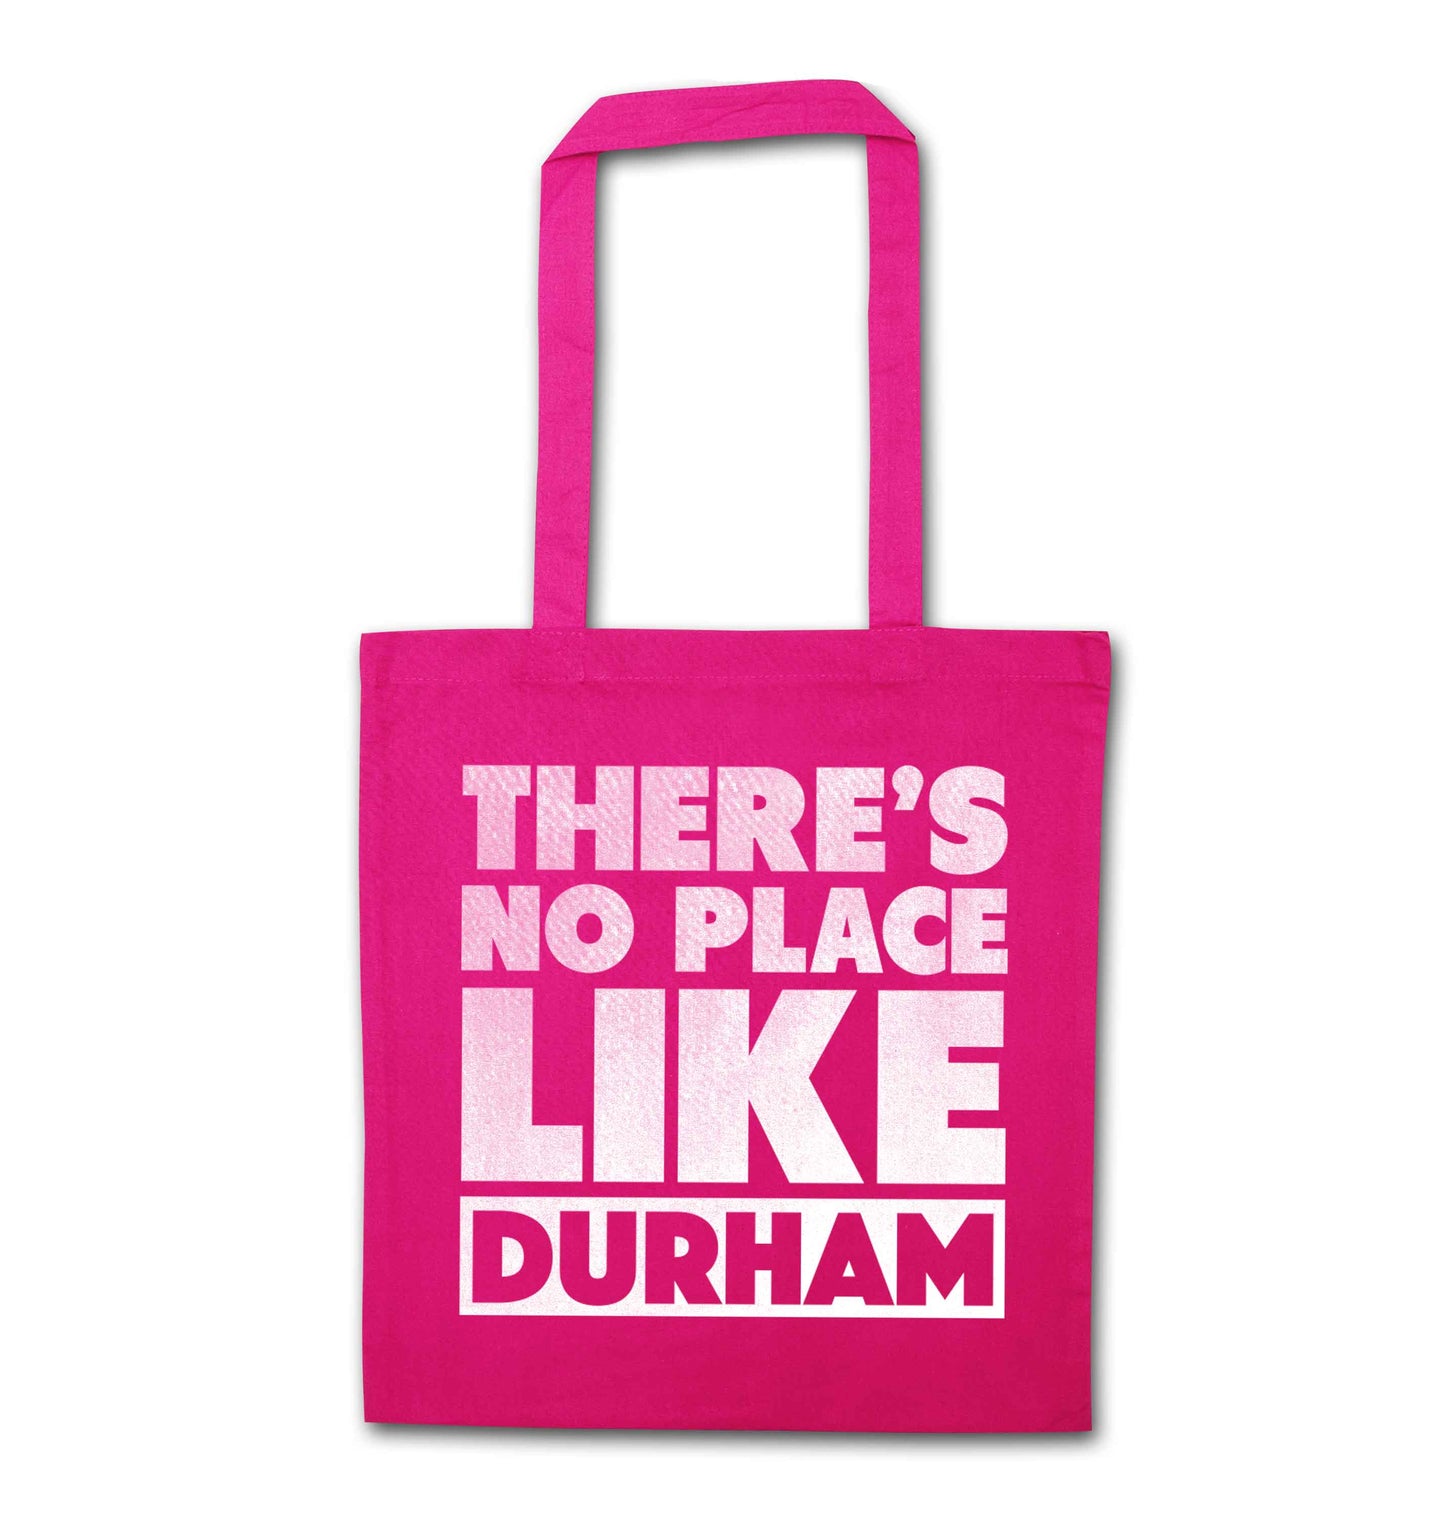 There's no place like Durham pink tote bag